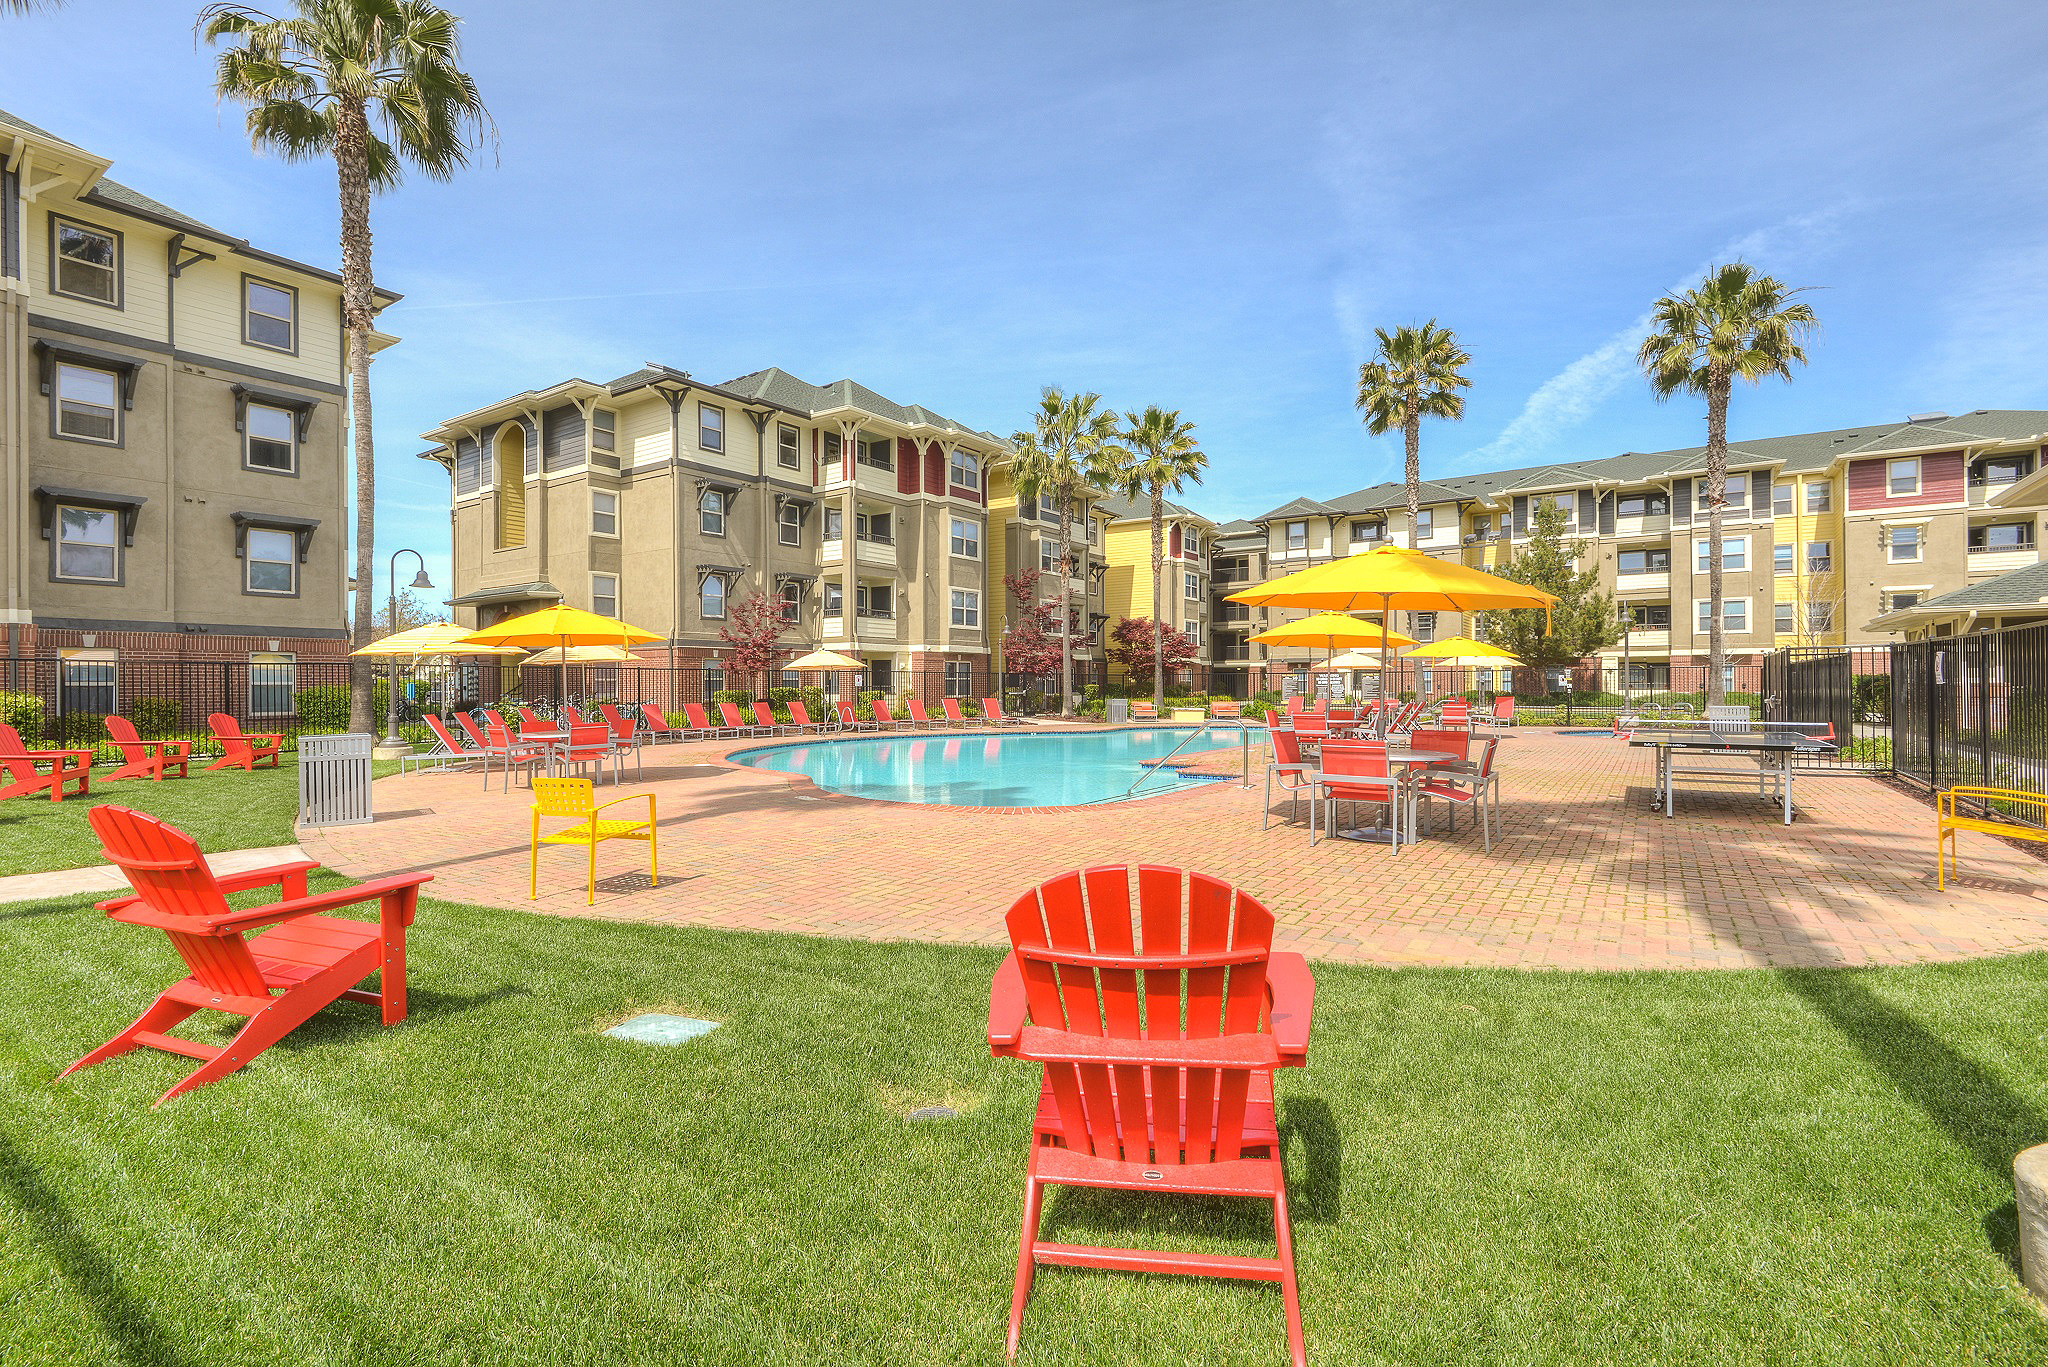 Exterior of lawn, pool deck and pool surrounded by palm trees and 4-story apartment complex